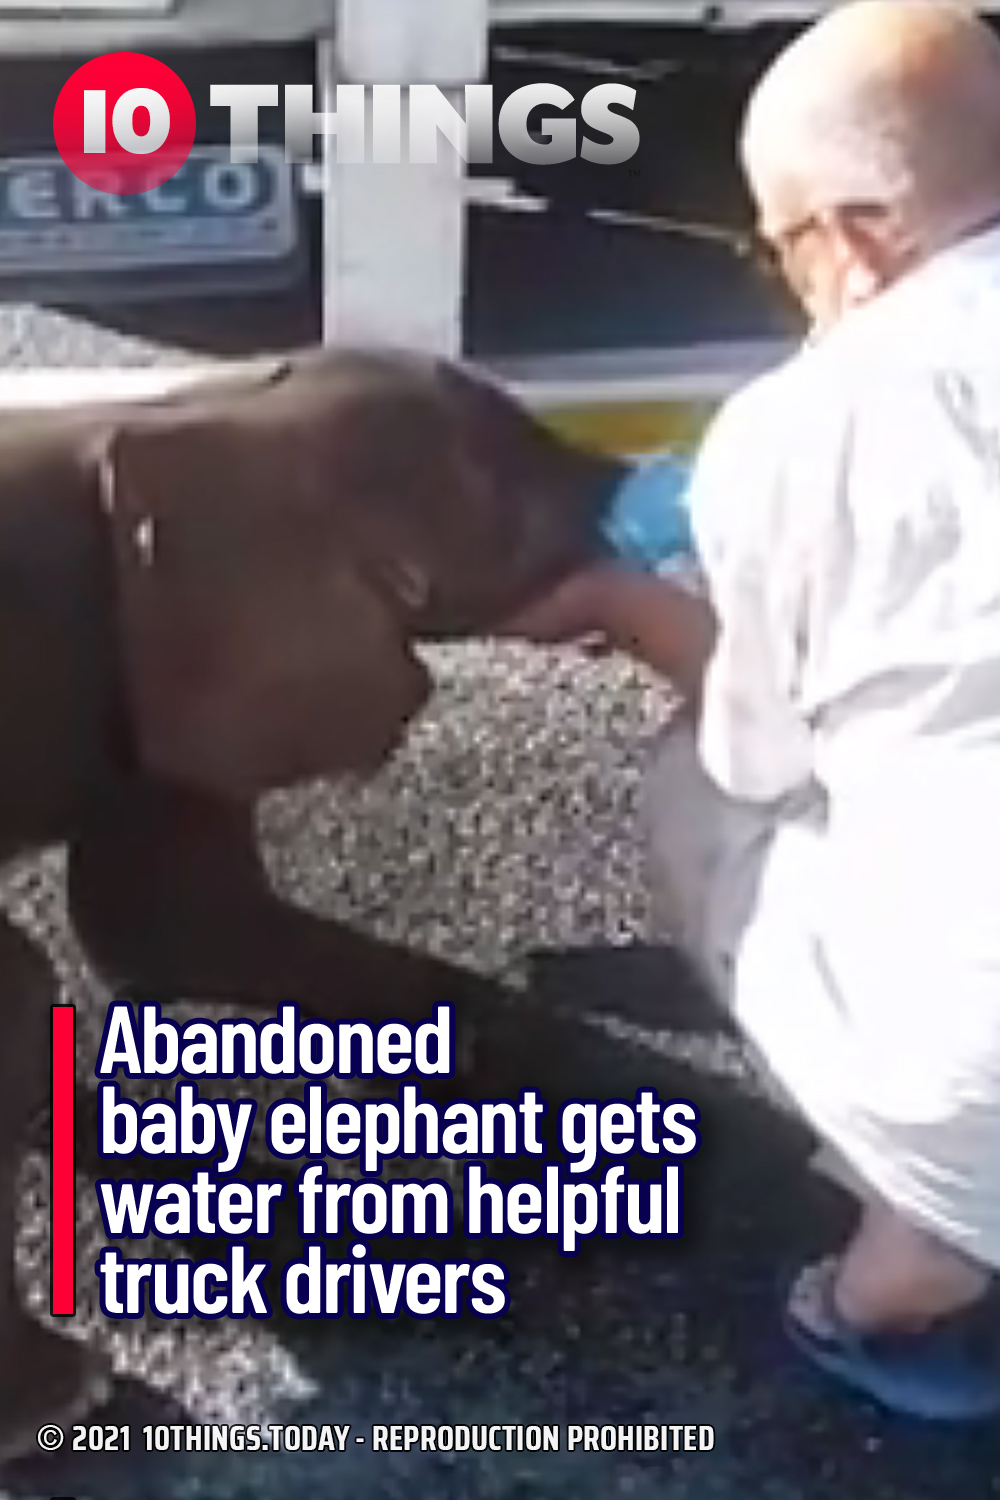 Abandoned baby elephant gets water from helpful truck drivers